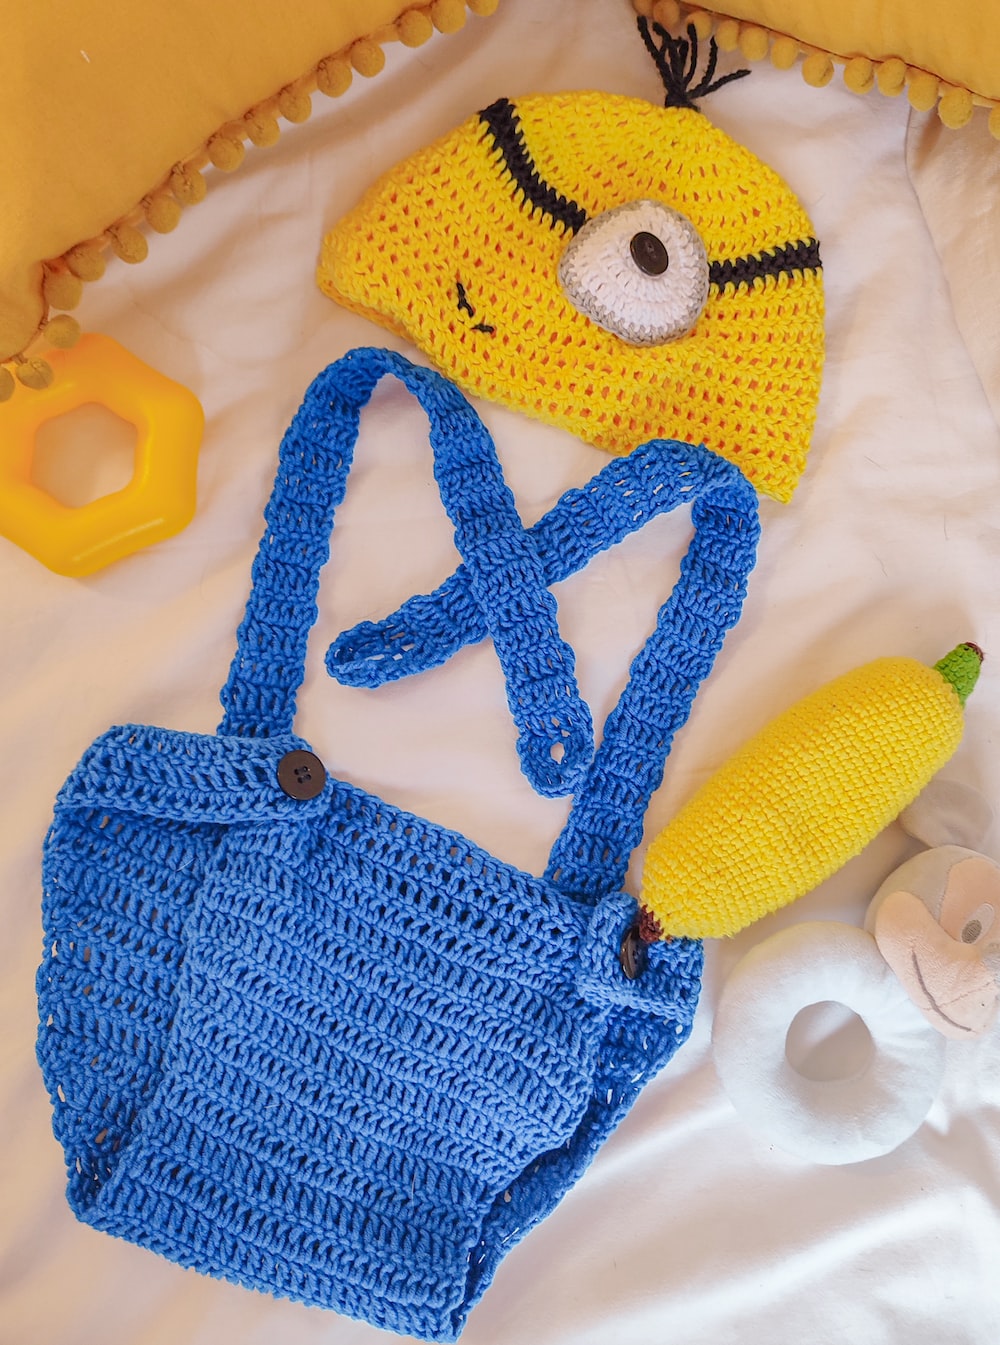 a crocheted bag, banana, and hat on a bed